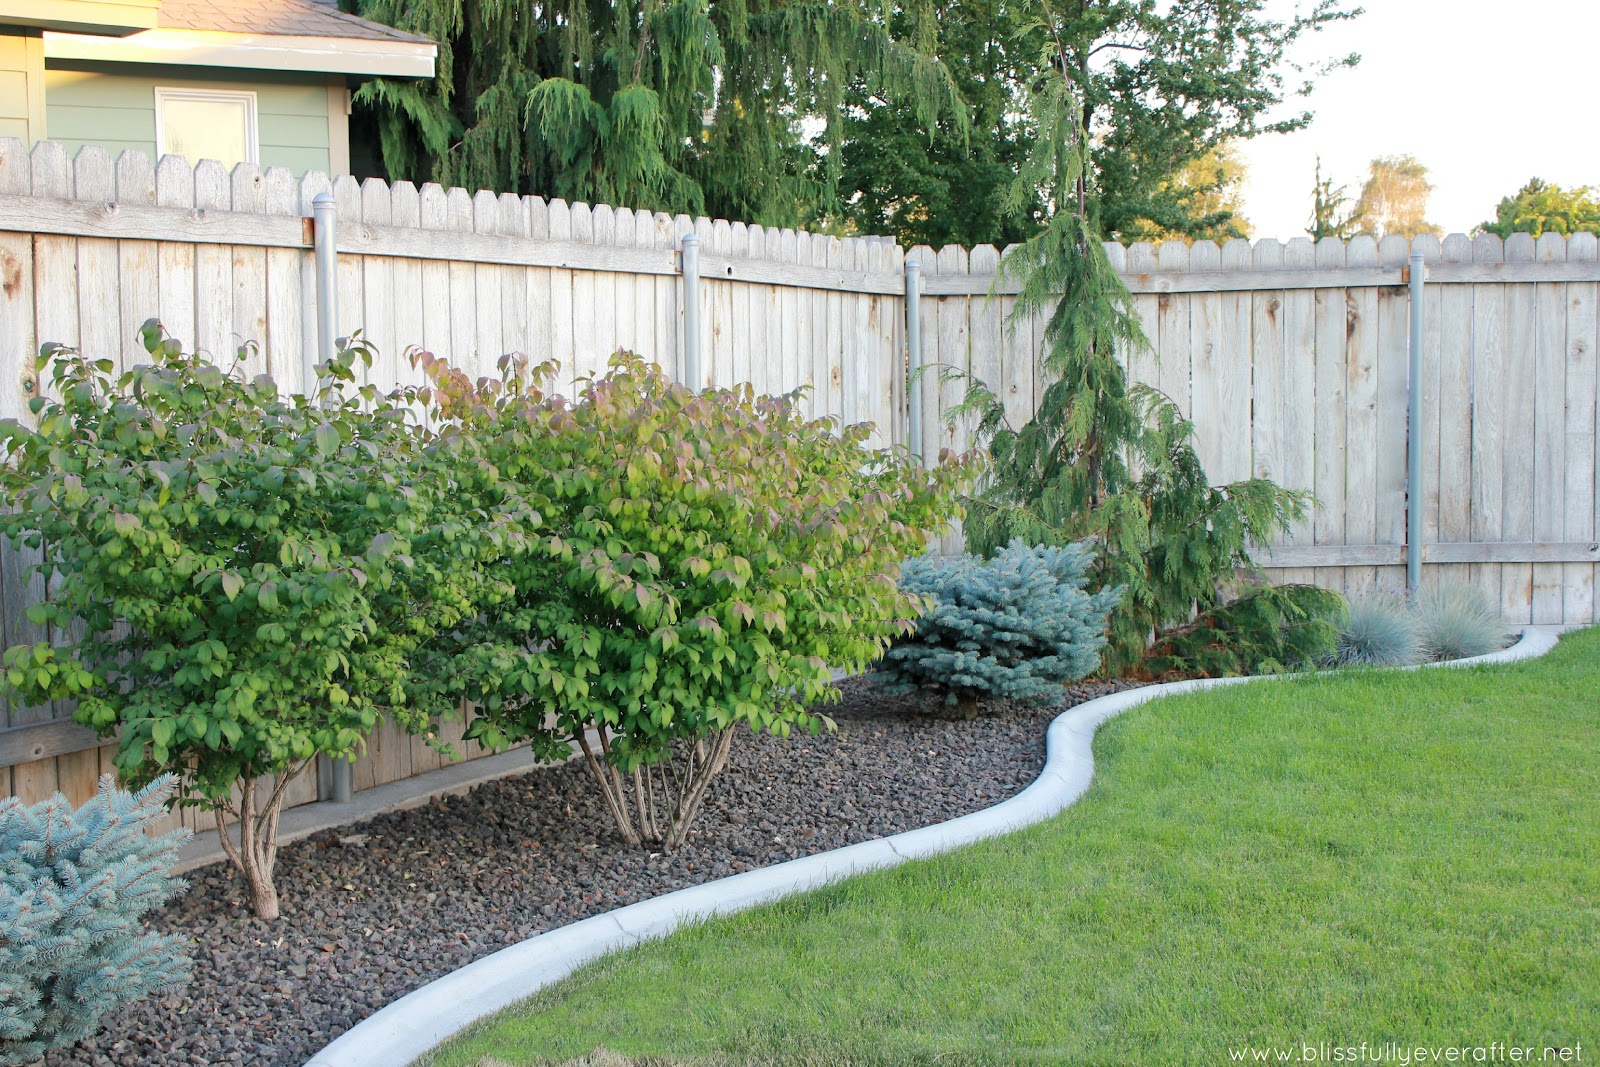 Yes landscaping Custom: Front yard landscaping ideas for bi level